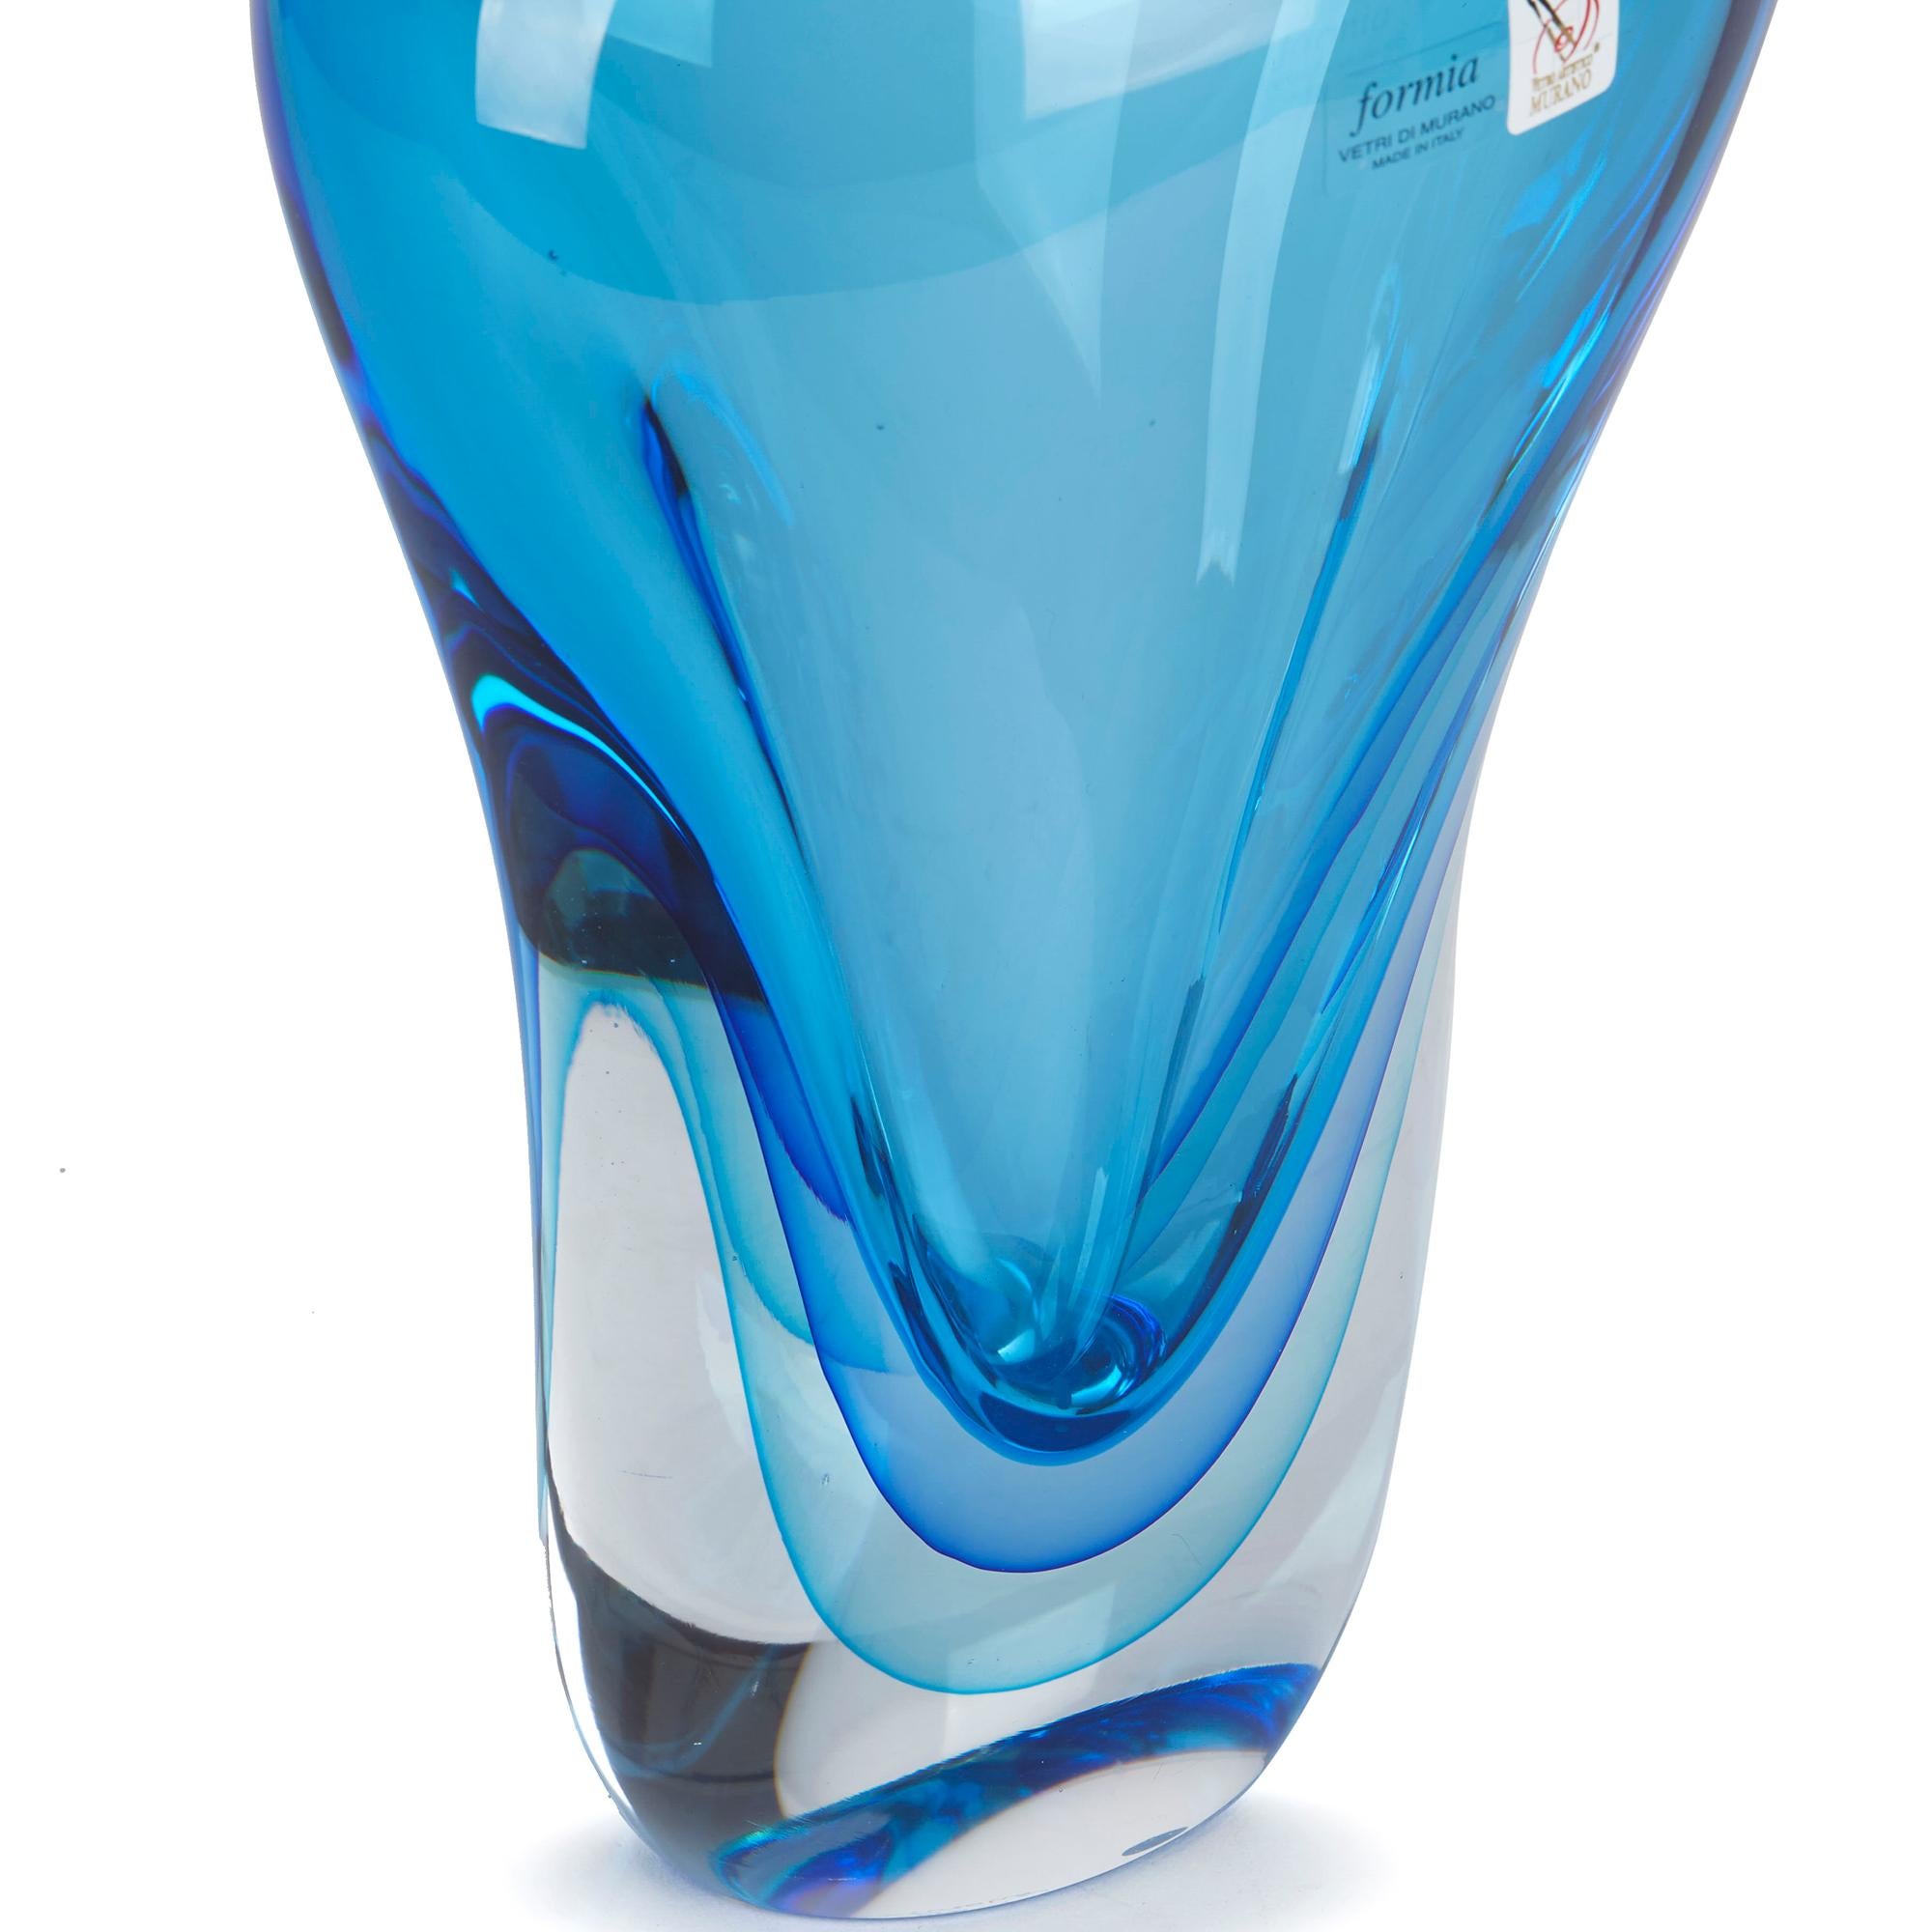 Formia Murano Large Sommerso Blue Art Glass Vase 2